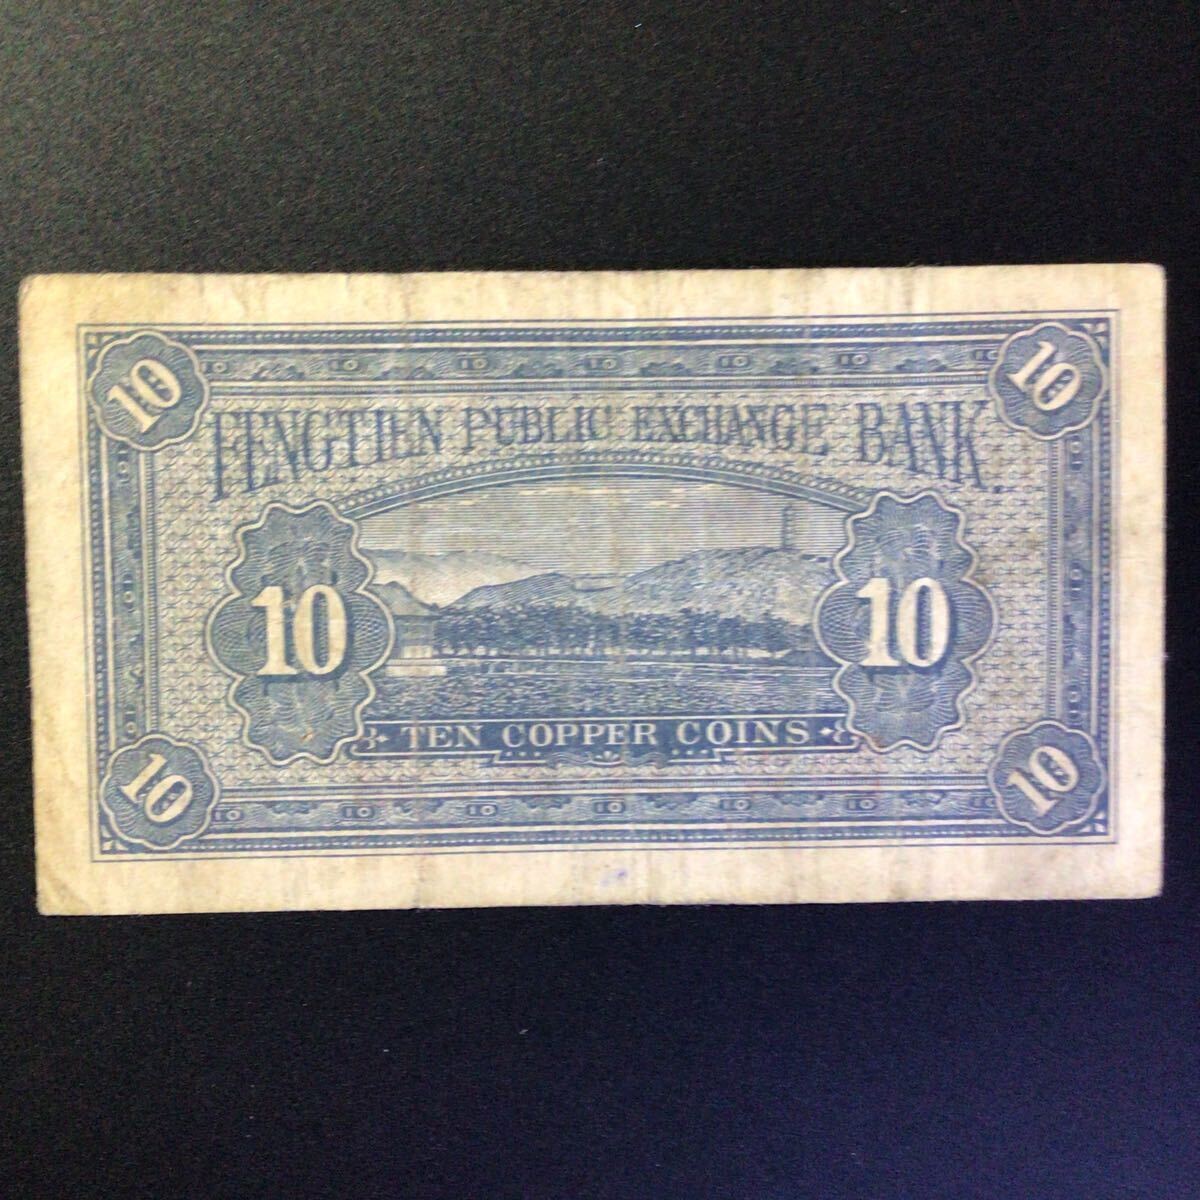 World Paper Money CHINA(Fengtien Public Exchange Bank Kung Tsi Bank of Fengtien)10 Coppers[1924]{Rare Note}